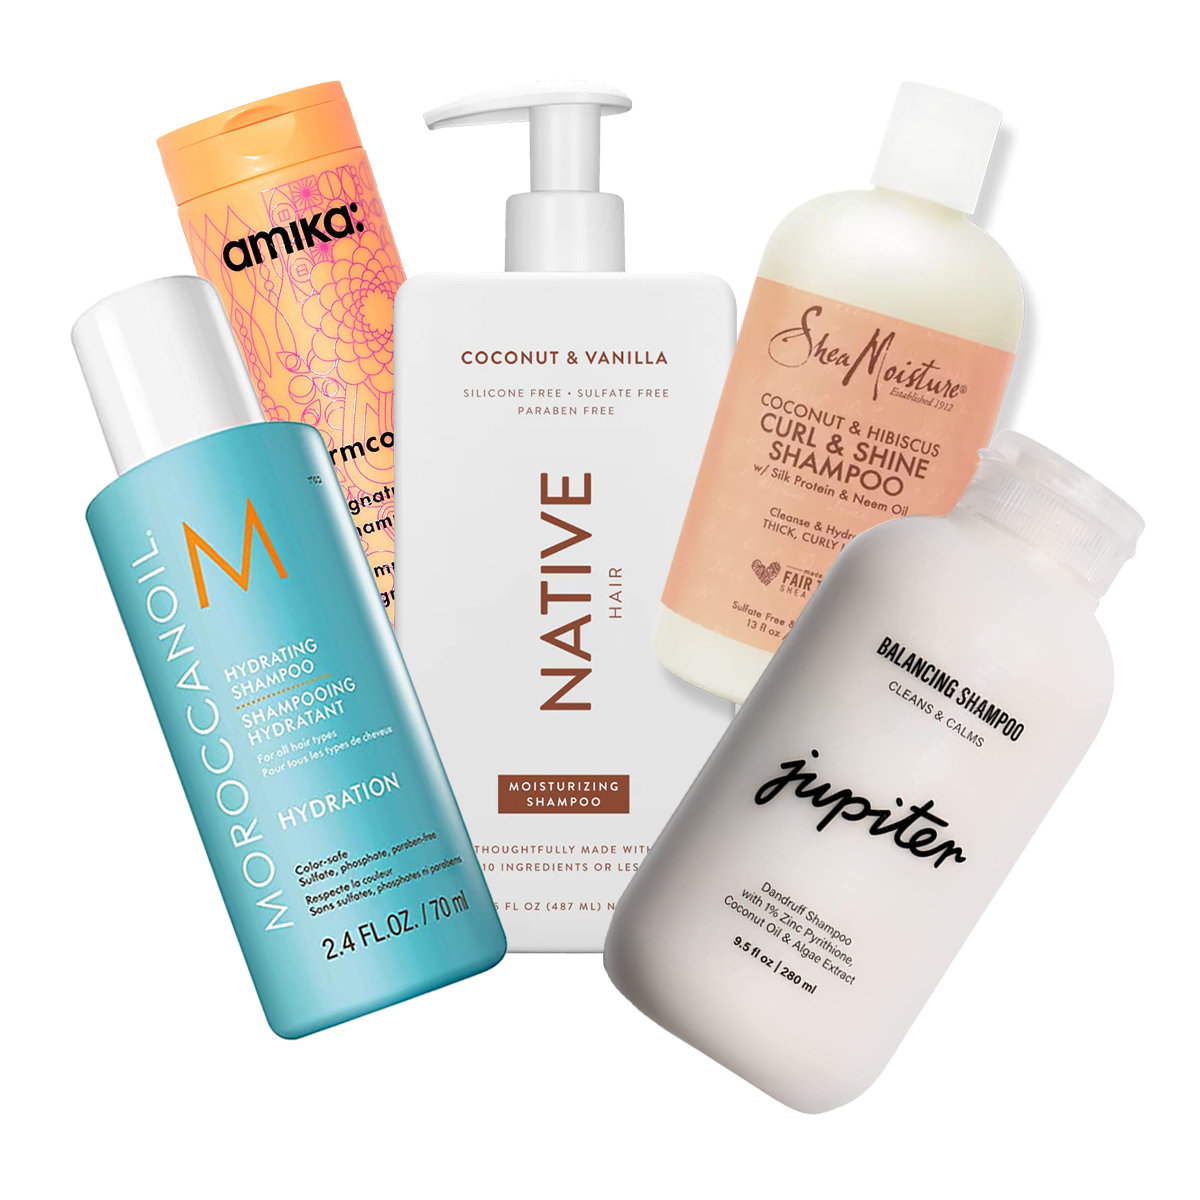 Montgomery Trend Markeer Shop the 10 Best Under $30 Sulfate-Free Shampoos - E! Online